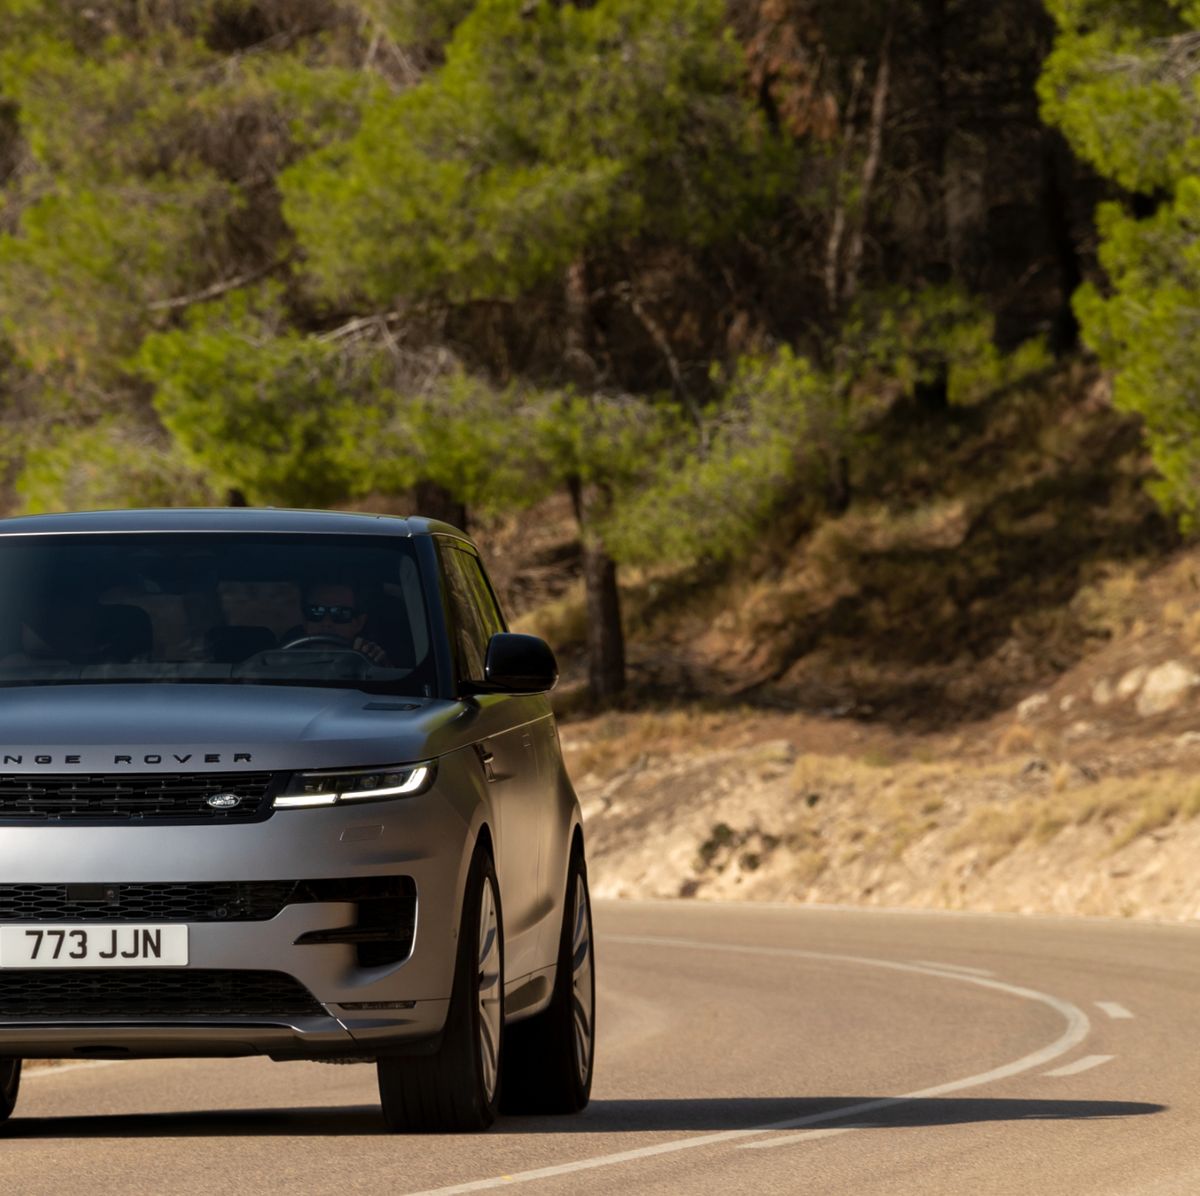 2023 Land Rover SUV Lineup Changes: Range Rover Sport Redesign and